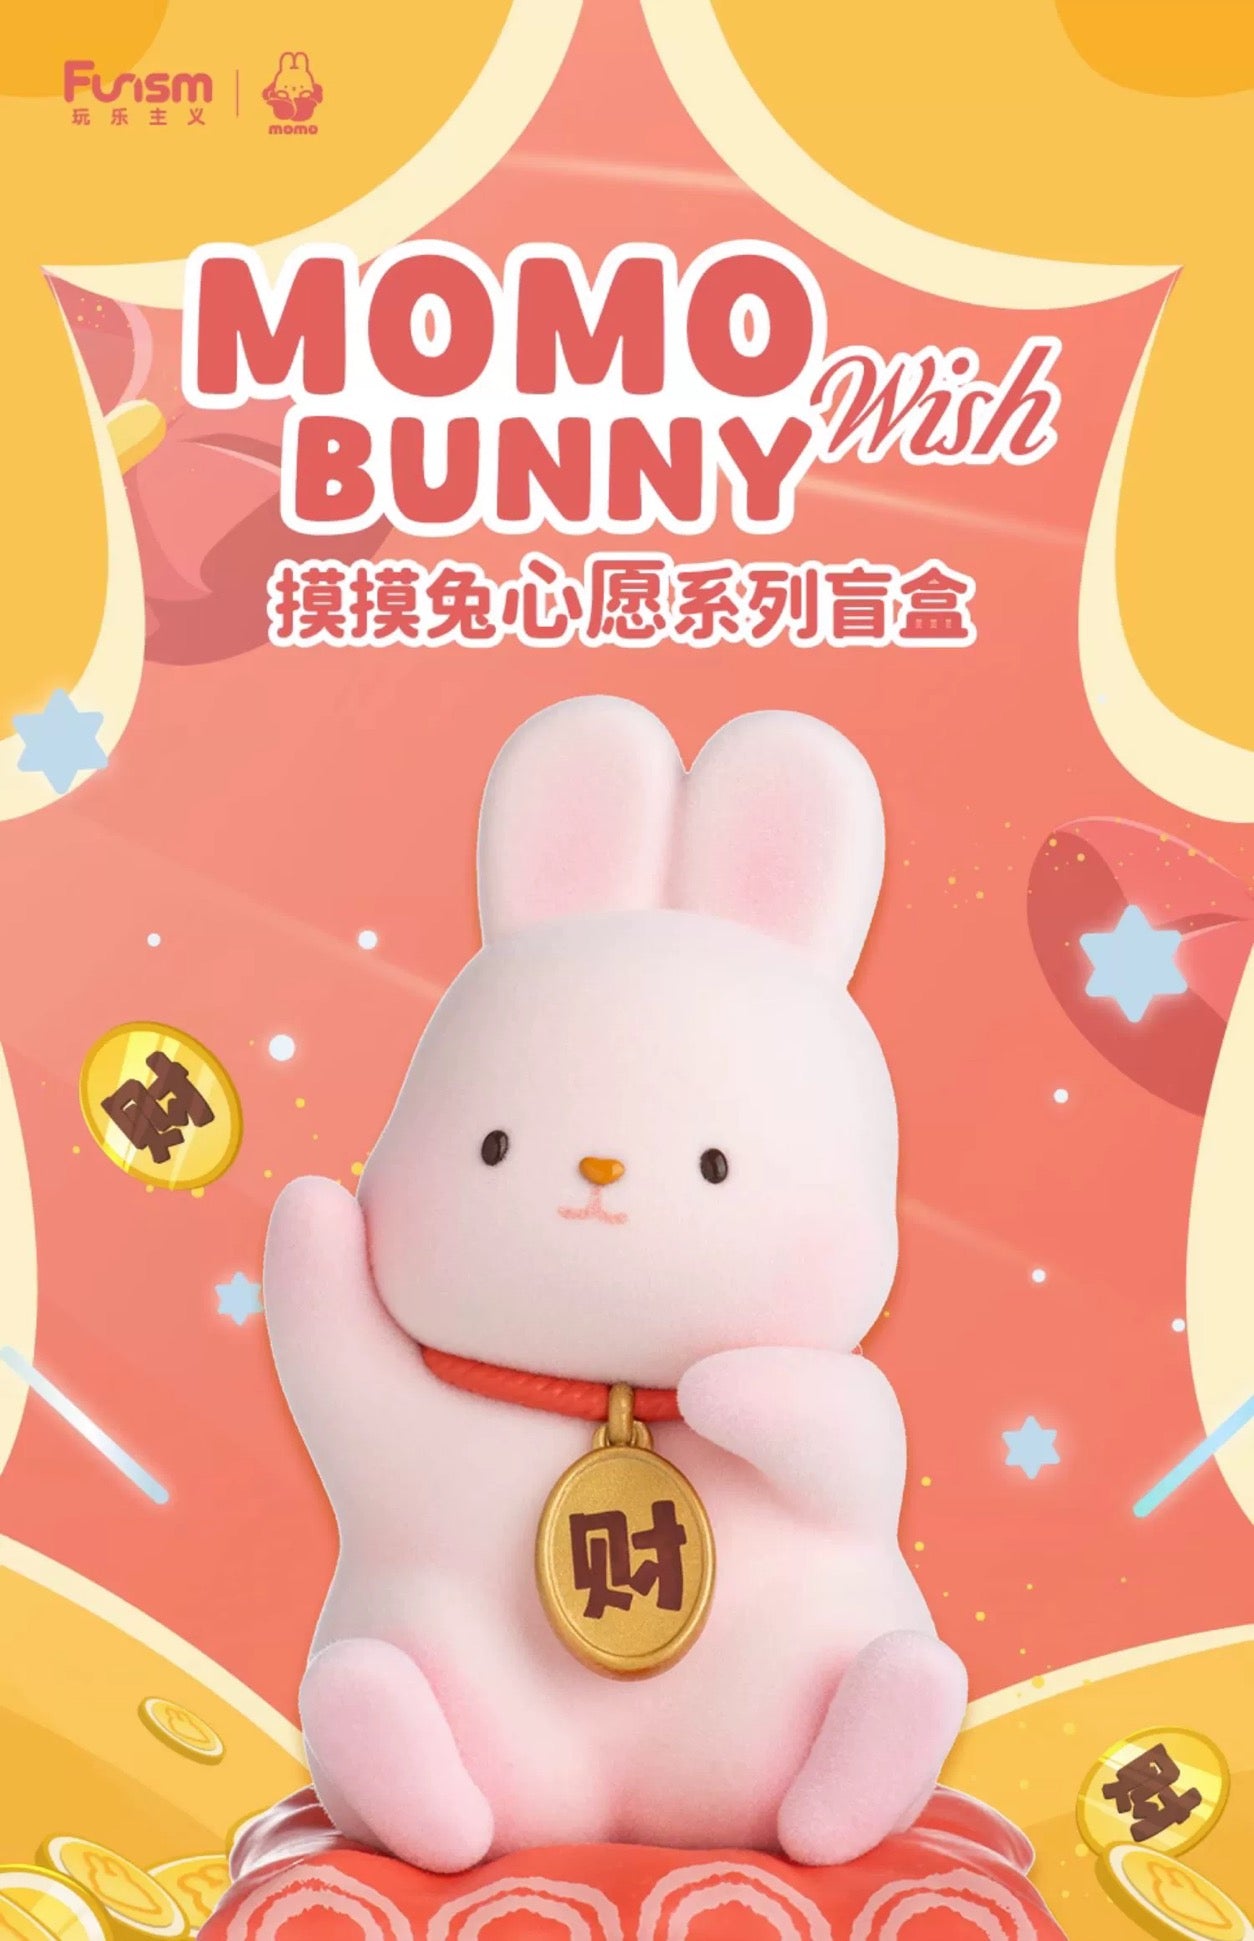 Mystery Blind Box Kawaii Lovely Characters Momo Bunny Wish -Toy Collection